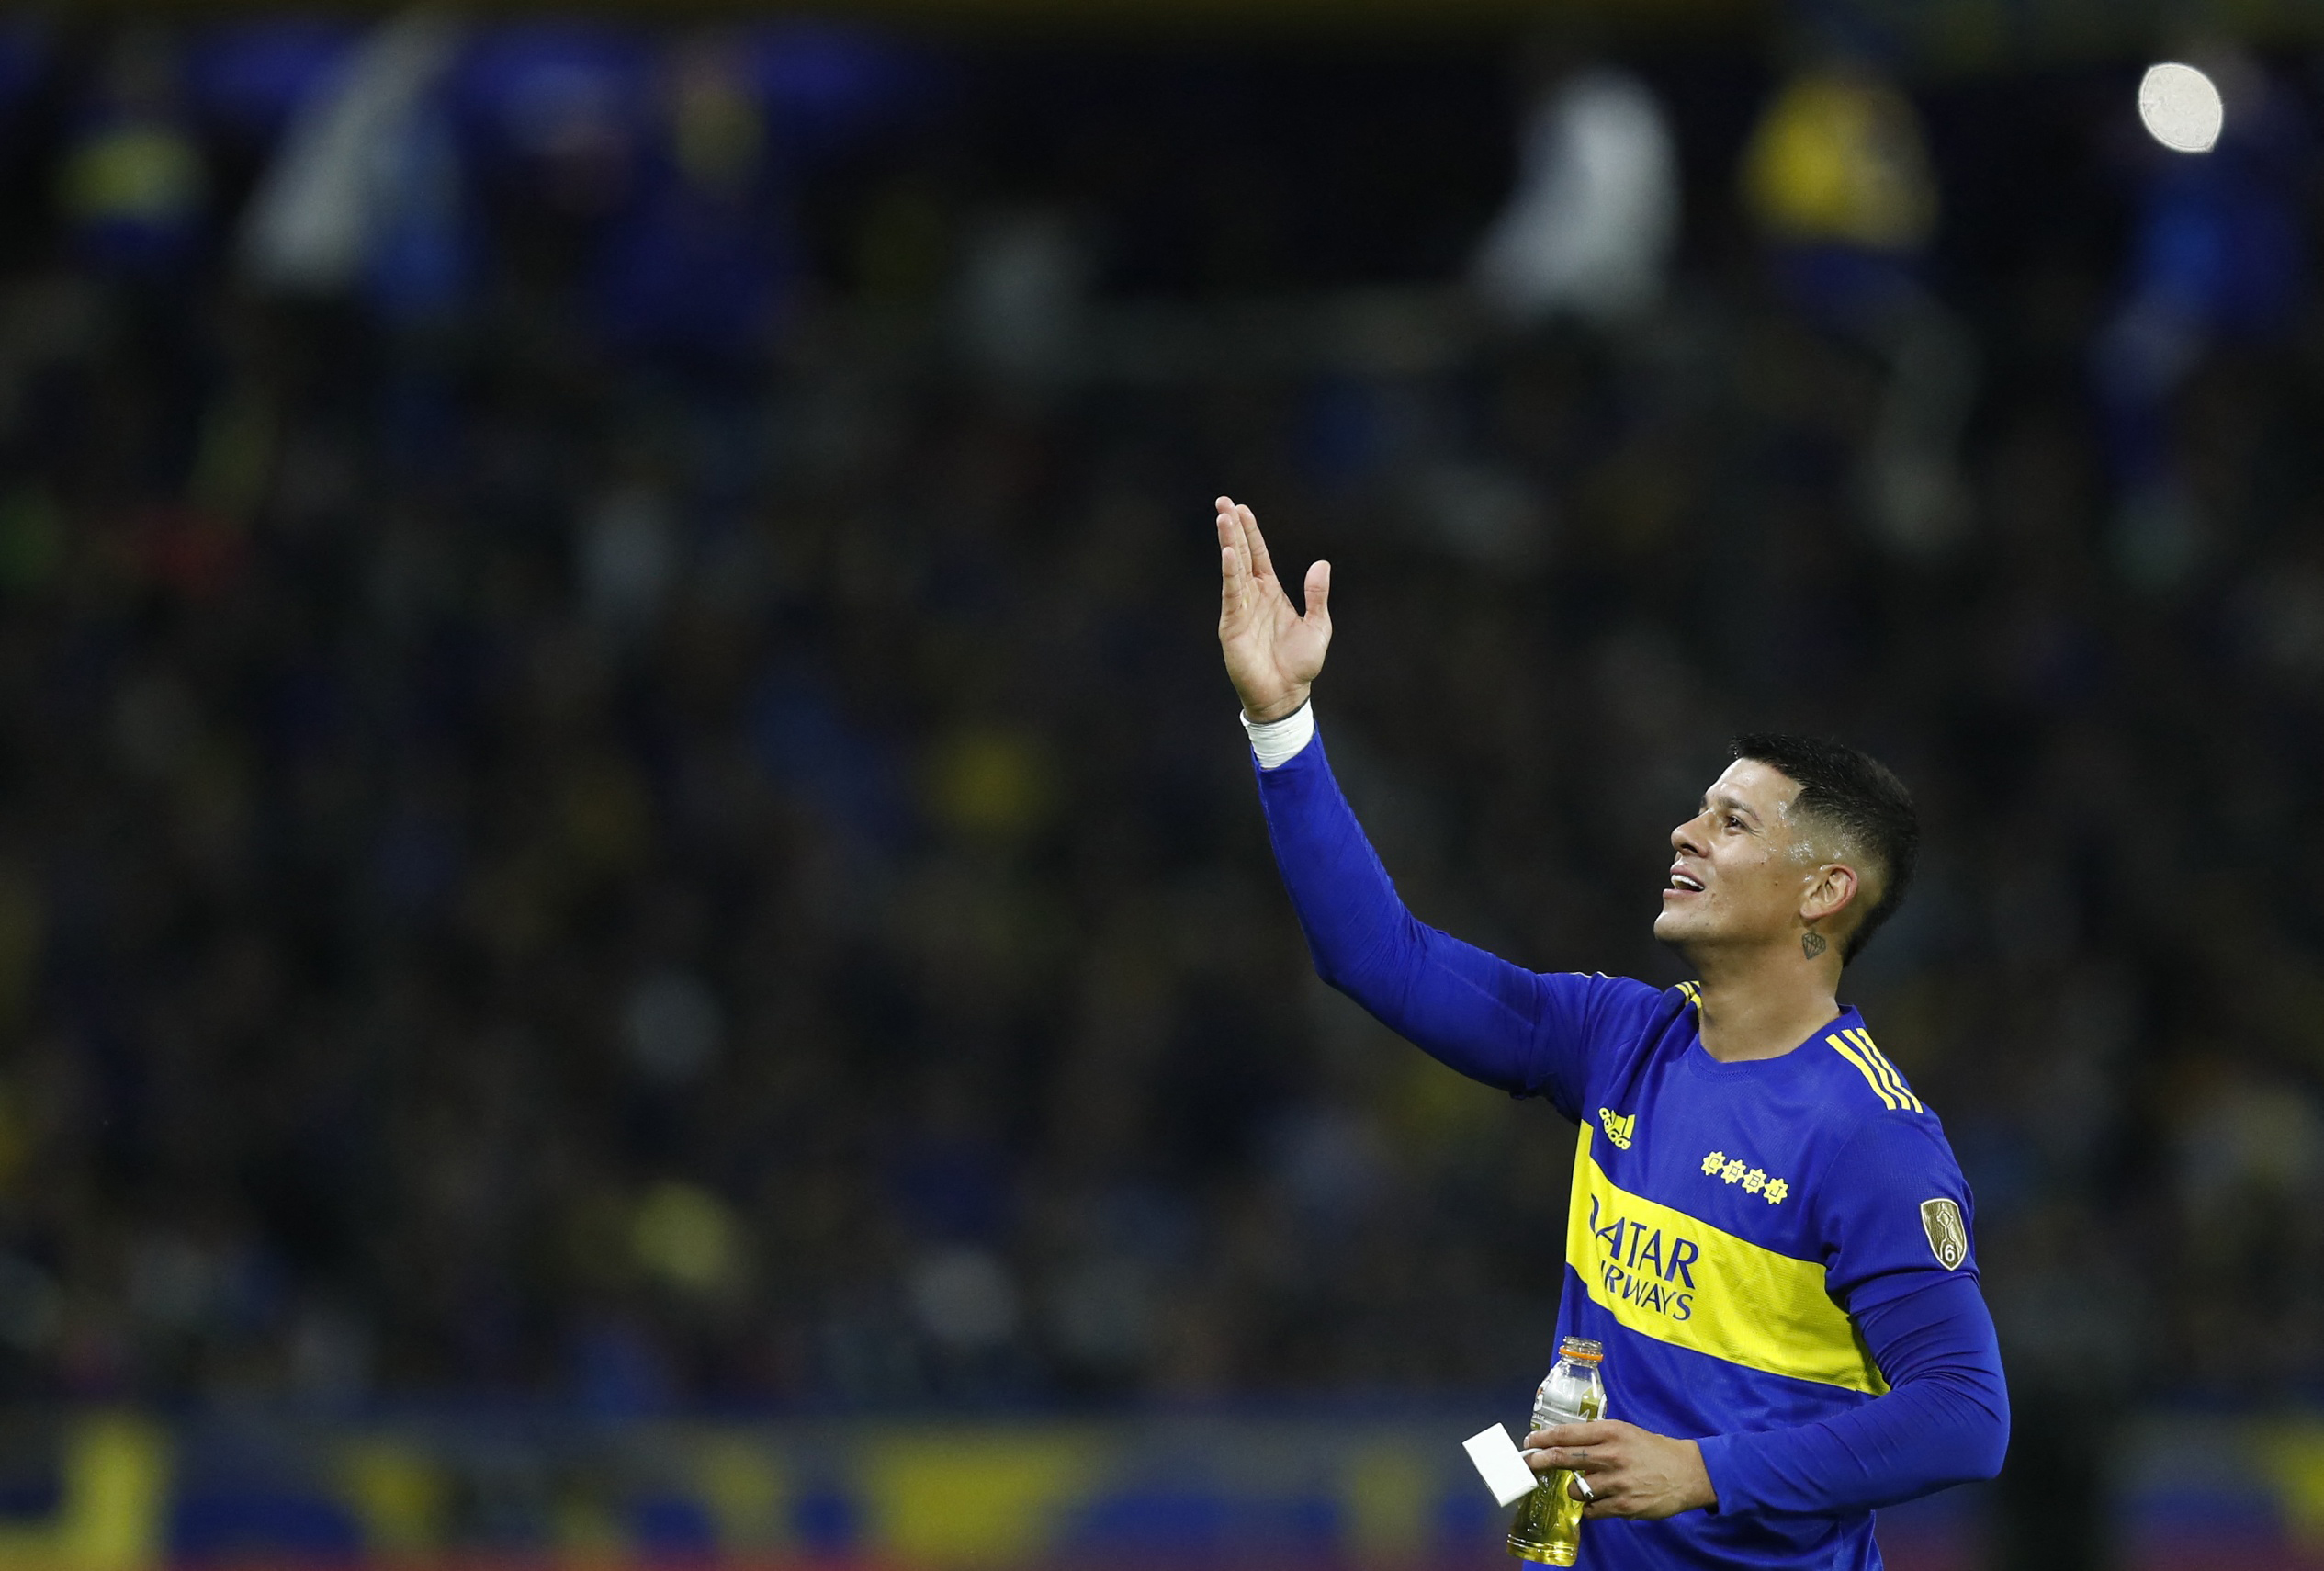 Marcos Rojo has chances to be the left back against Corinthians for the Copa Libertadores (REUTERS / Agustin Marcarian)